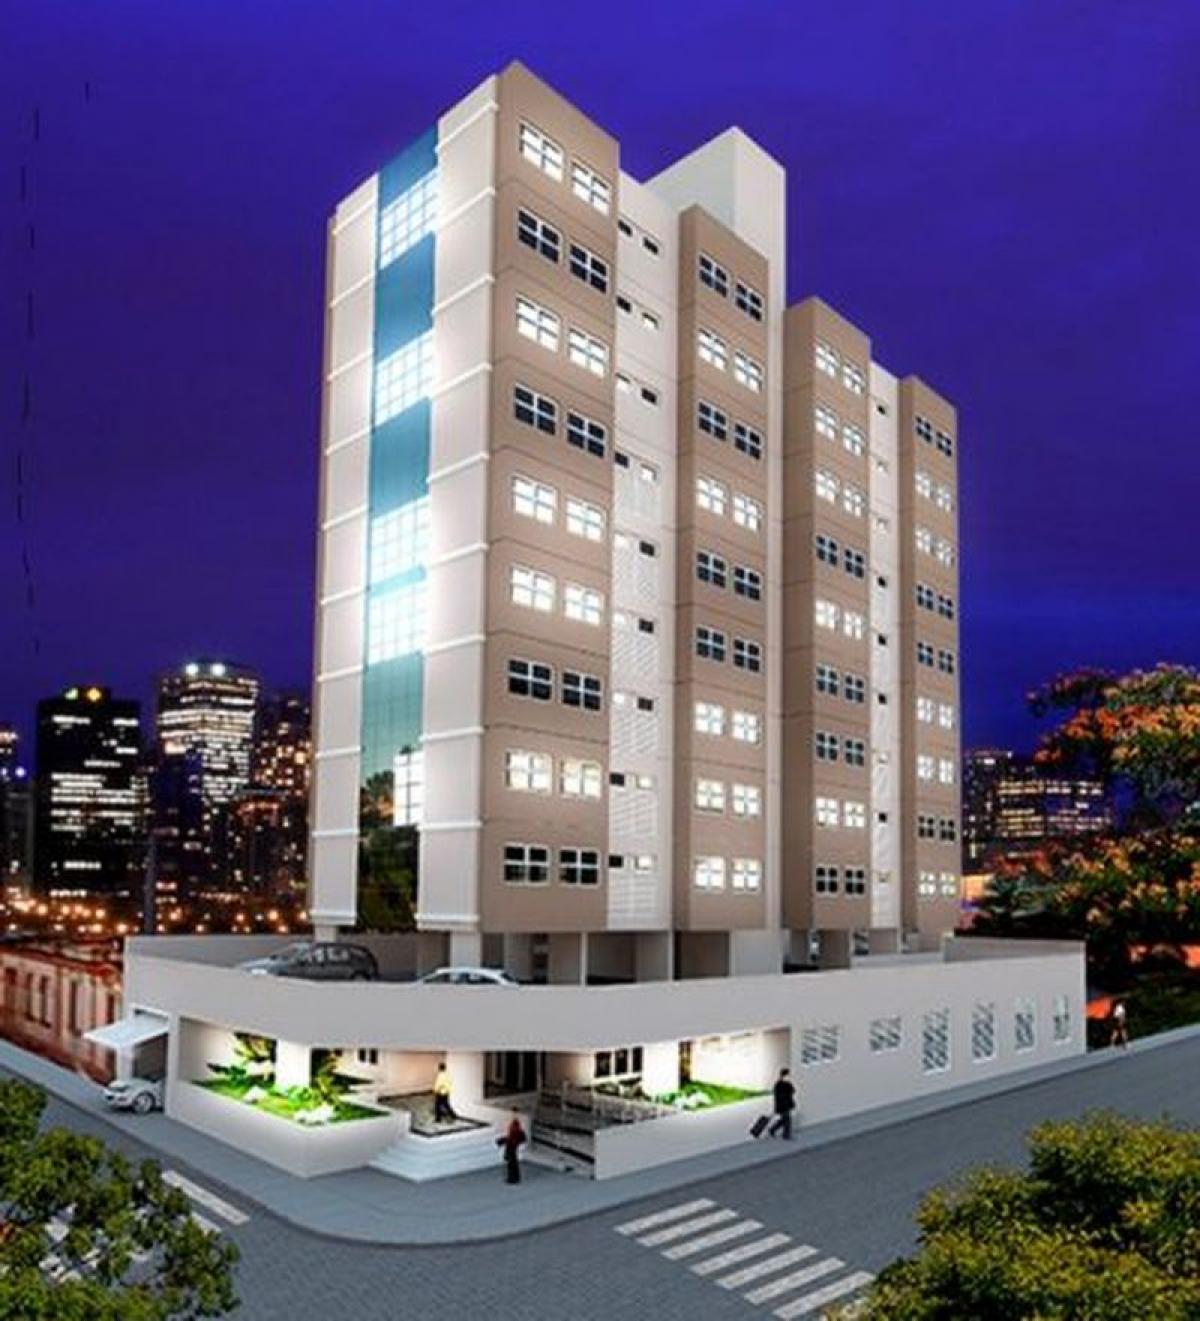 Picture of Commercial Building For Sale in Tatui, Sao Paulo, Brazil